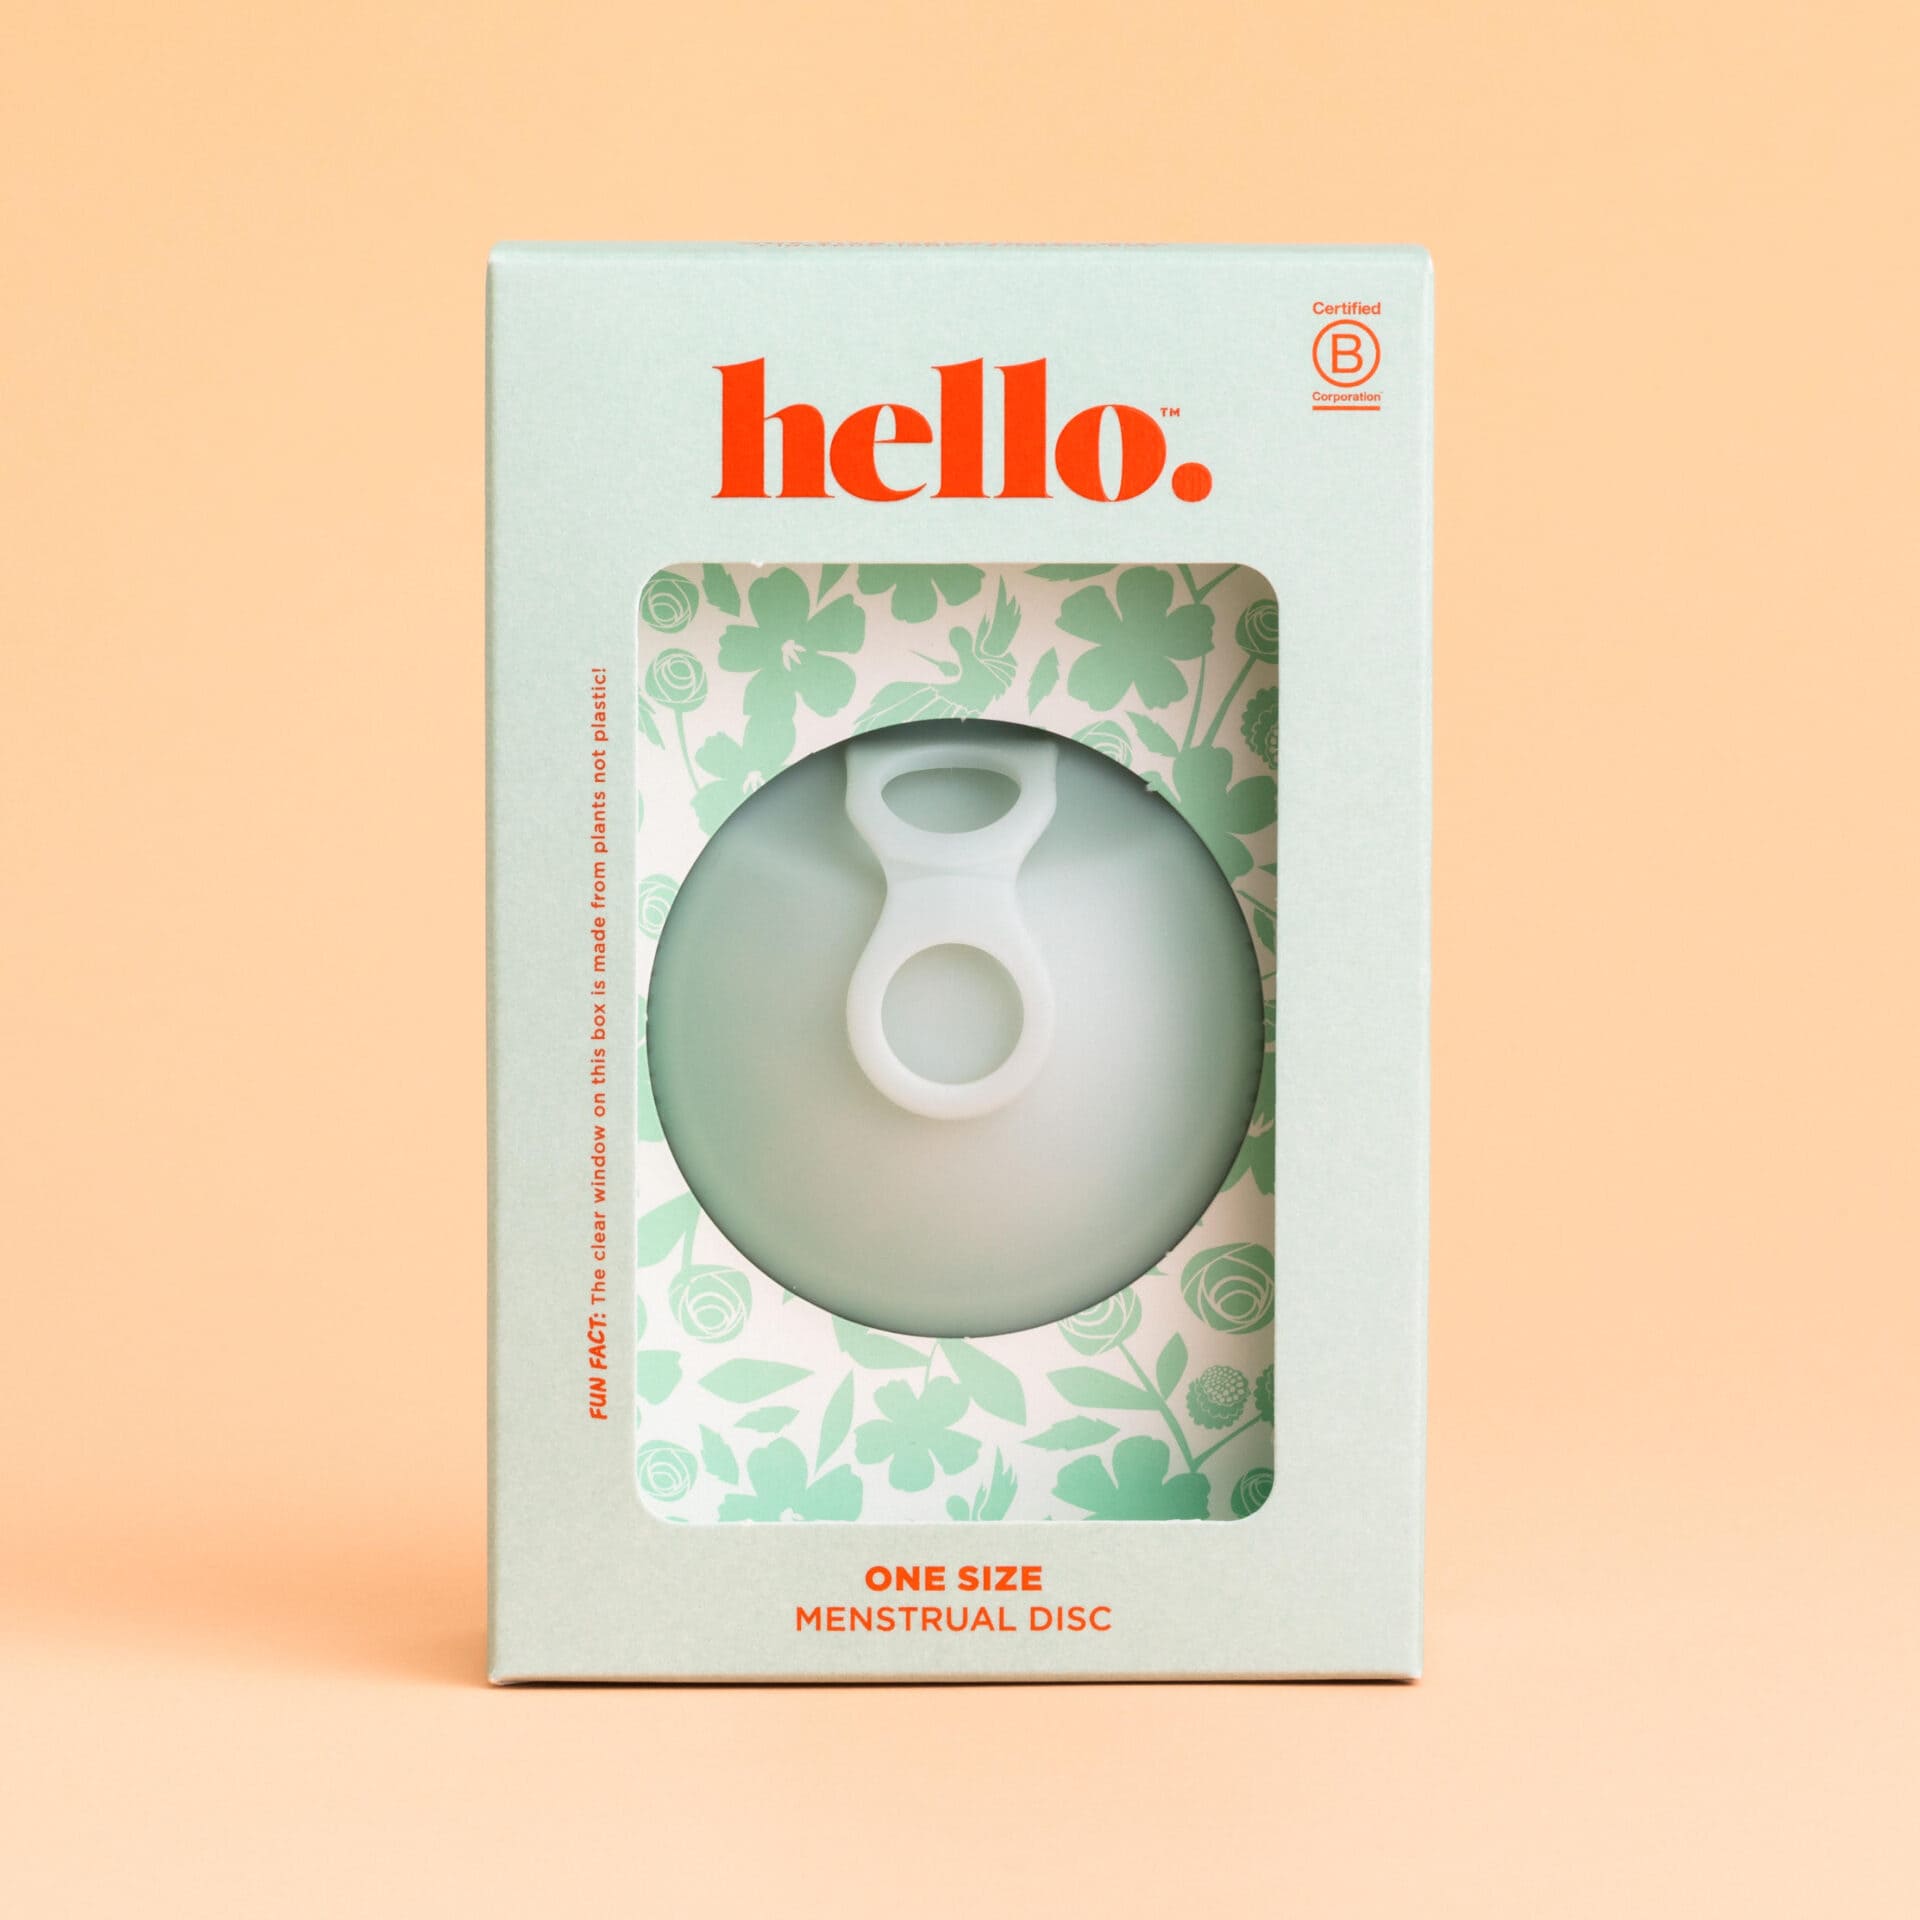 Hello disk, sanitary product 